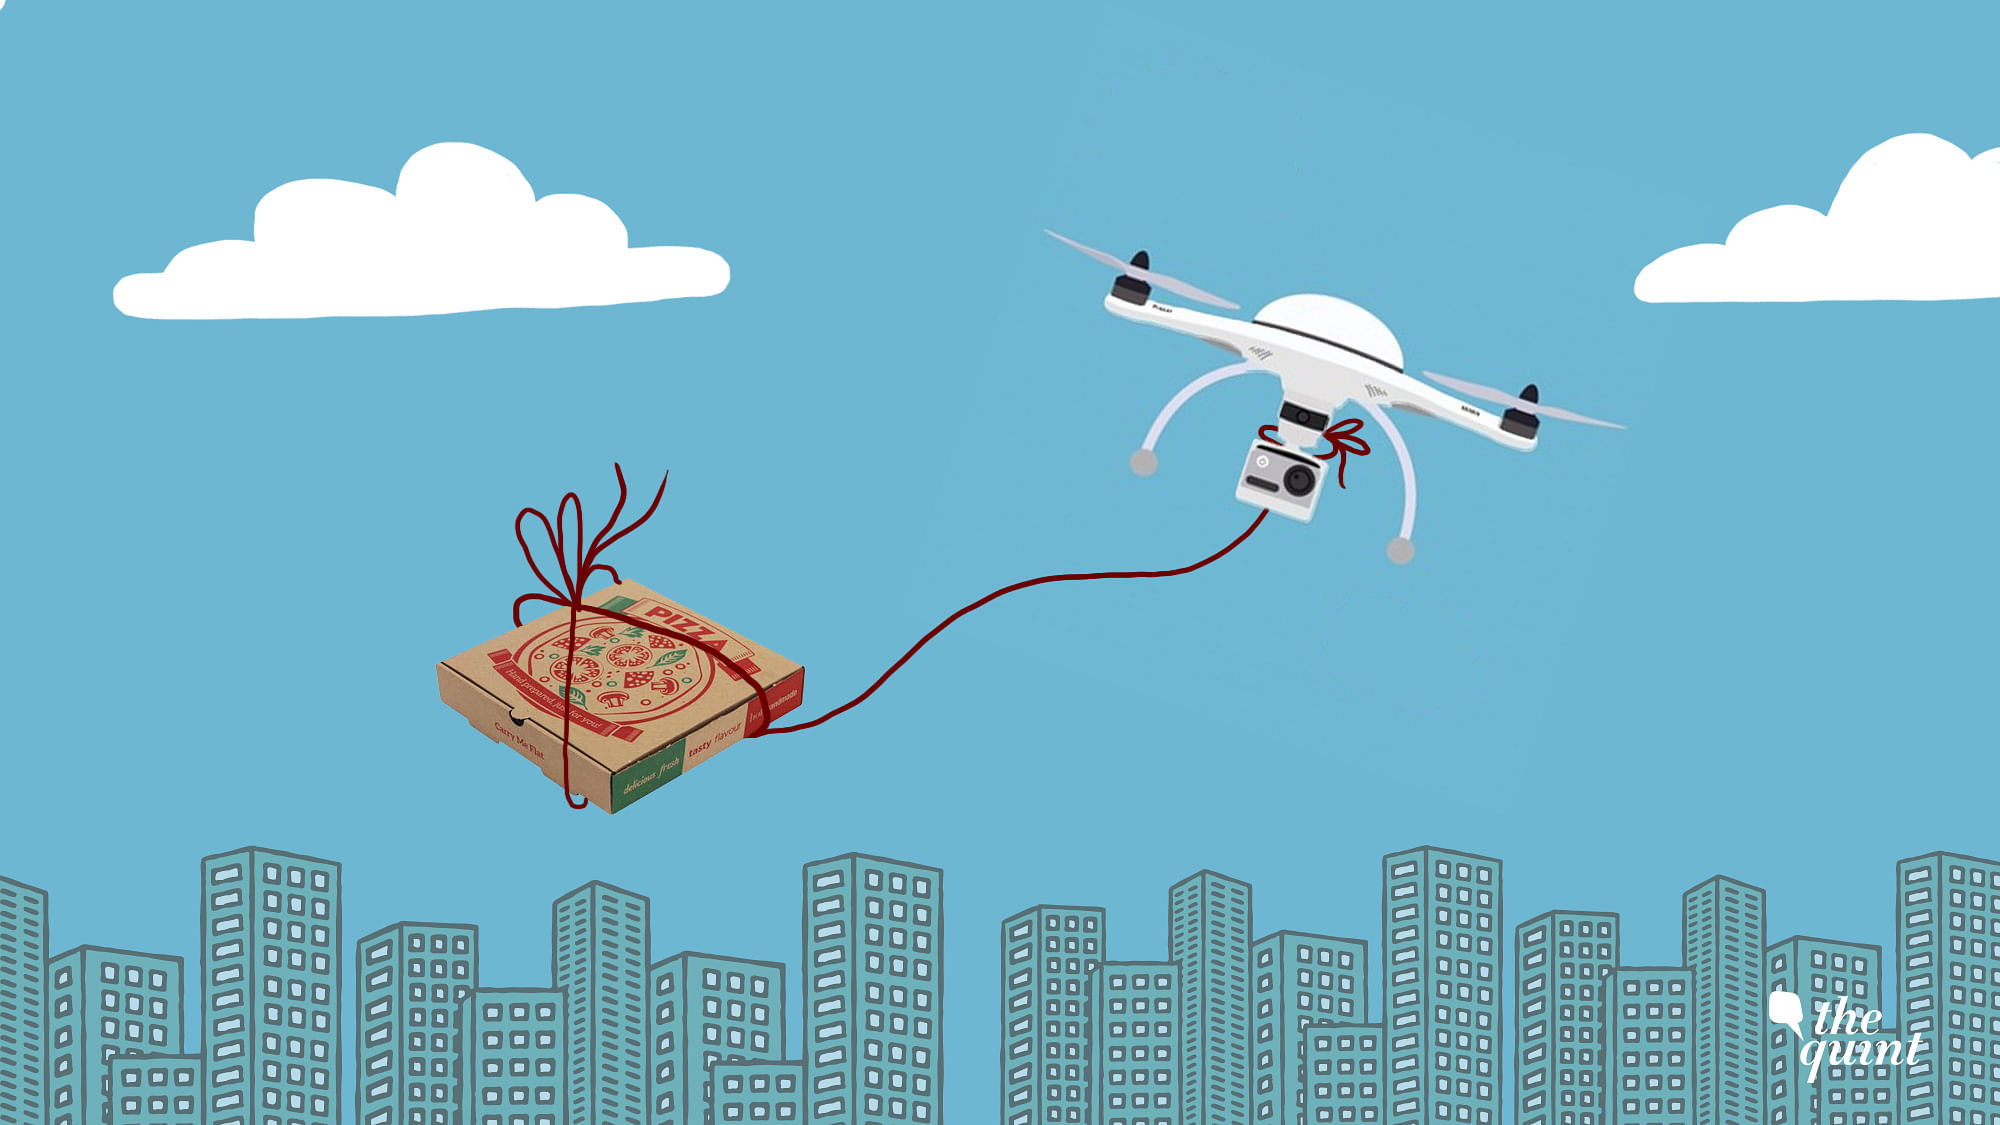 Amazon has been looking to offer delivery via drones for a while now.&nbsp;